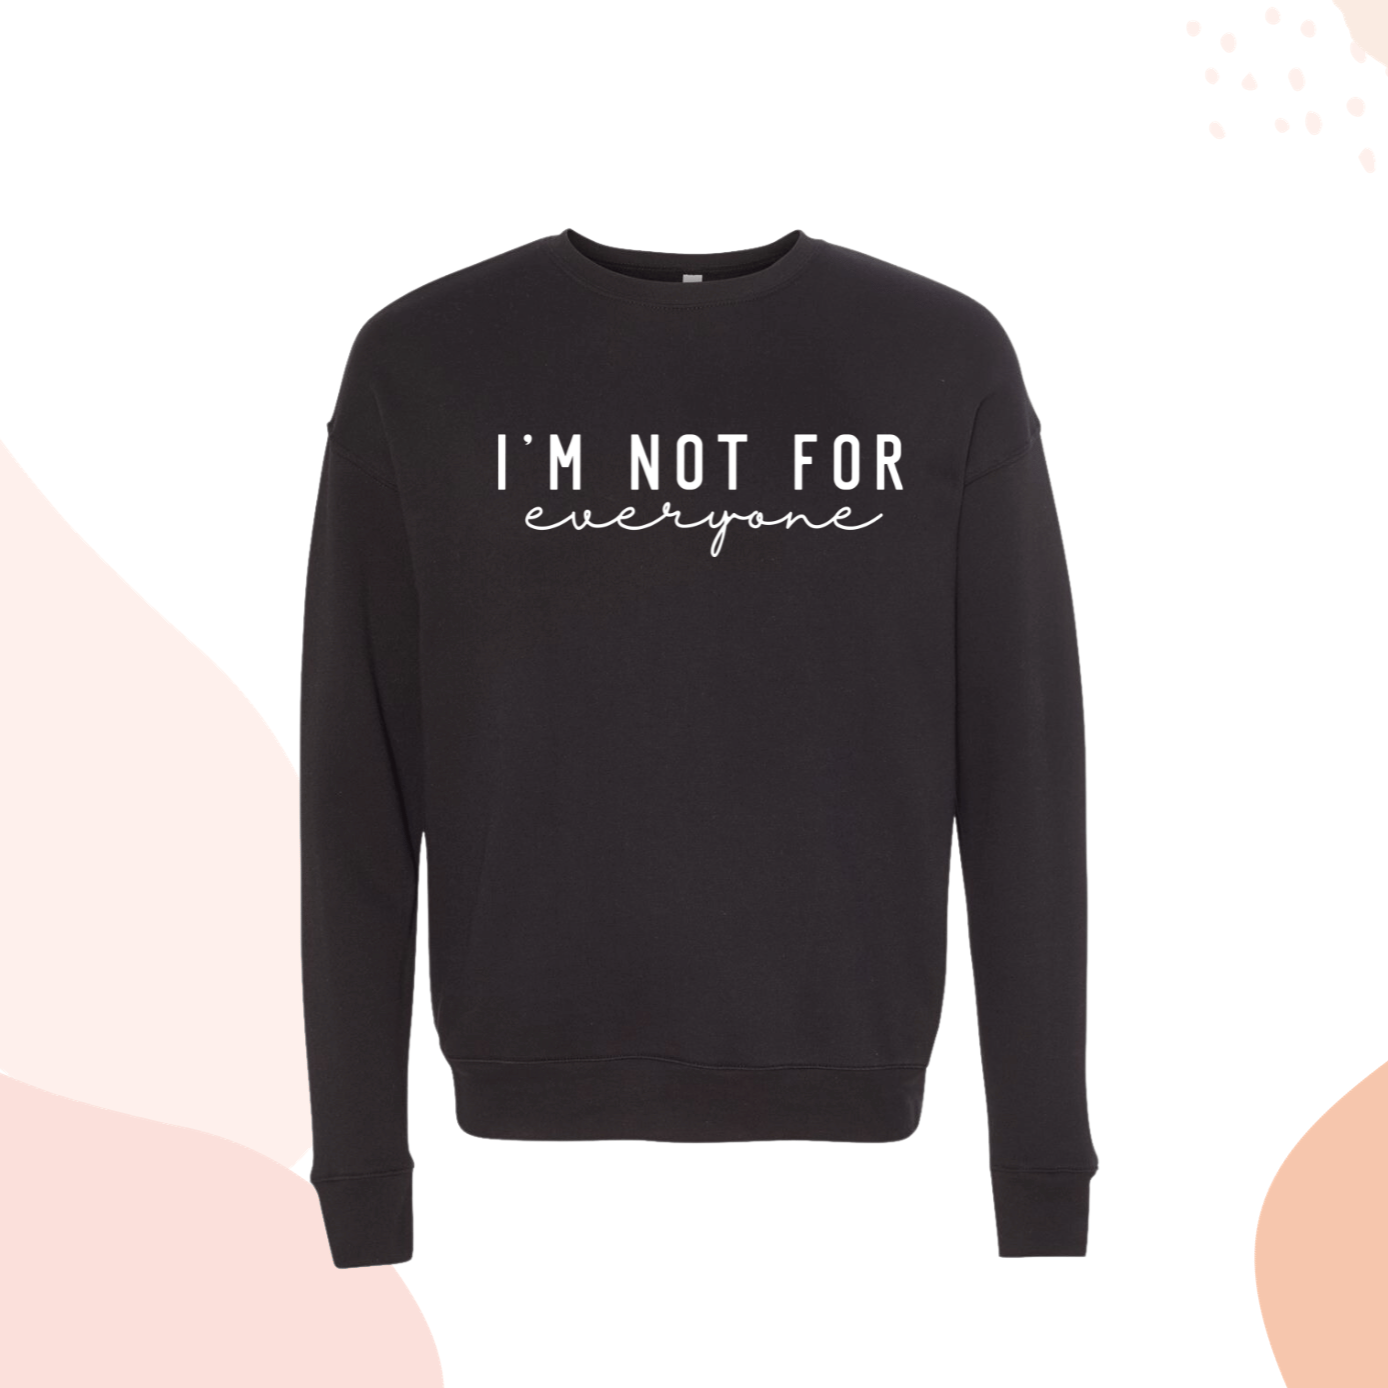 I’m Not for Everyone Funny Sweatshirt Black for Women Self Love Black Crewneck Protect Your Peace Sweater for Her Black